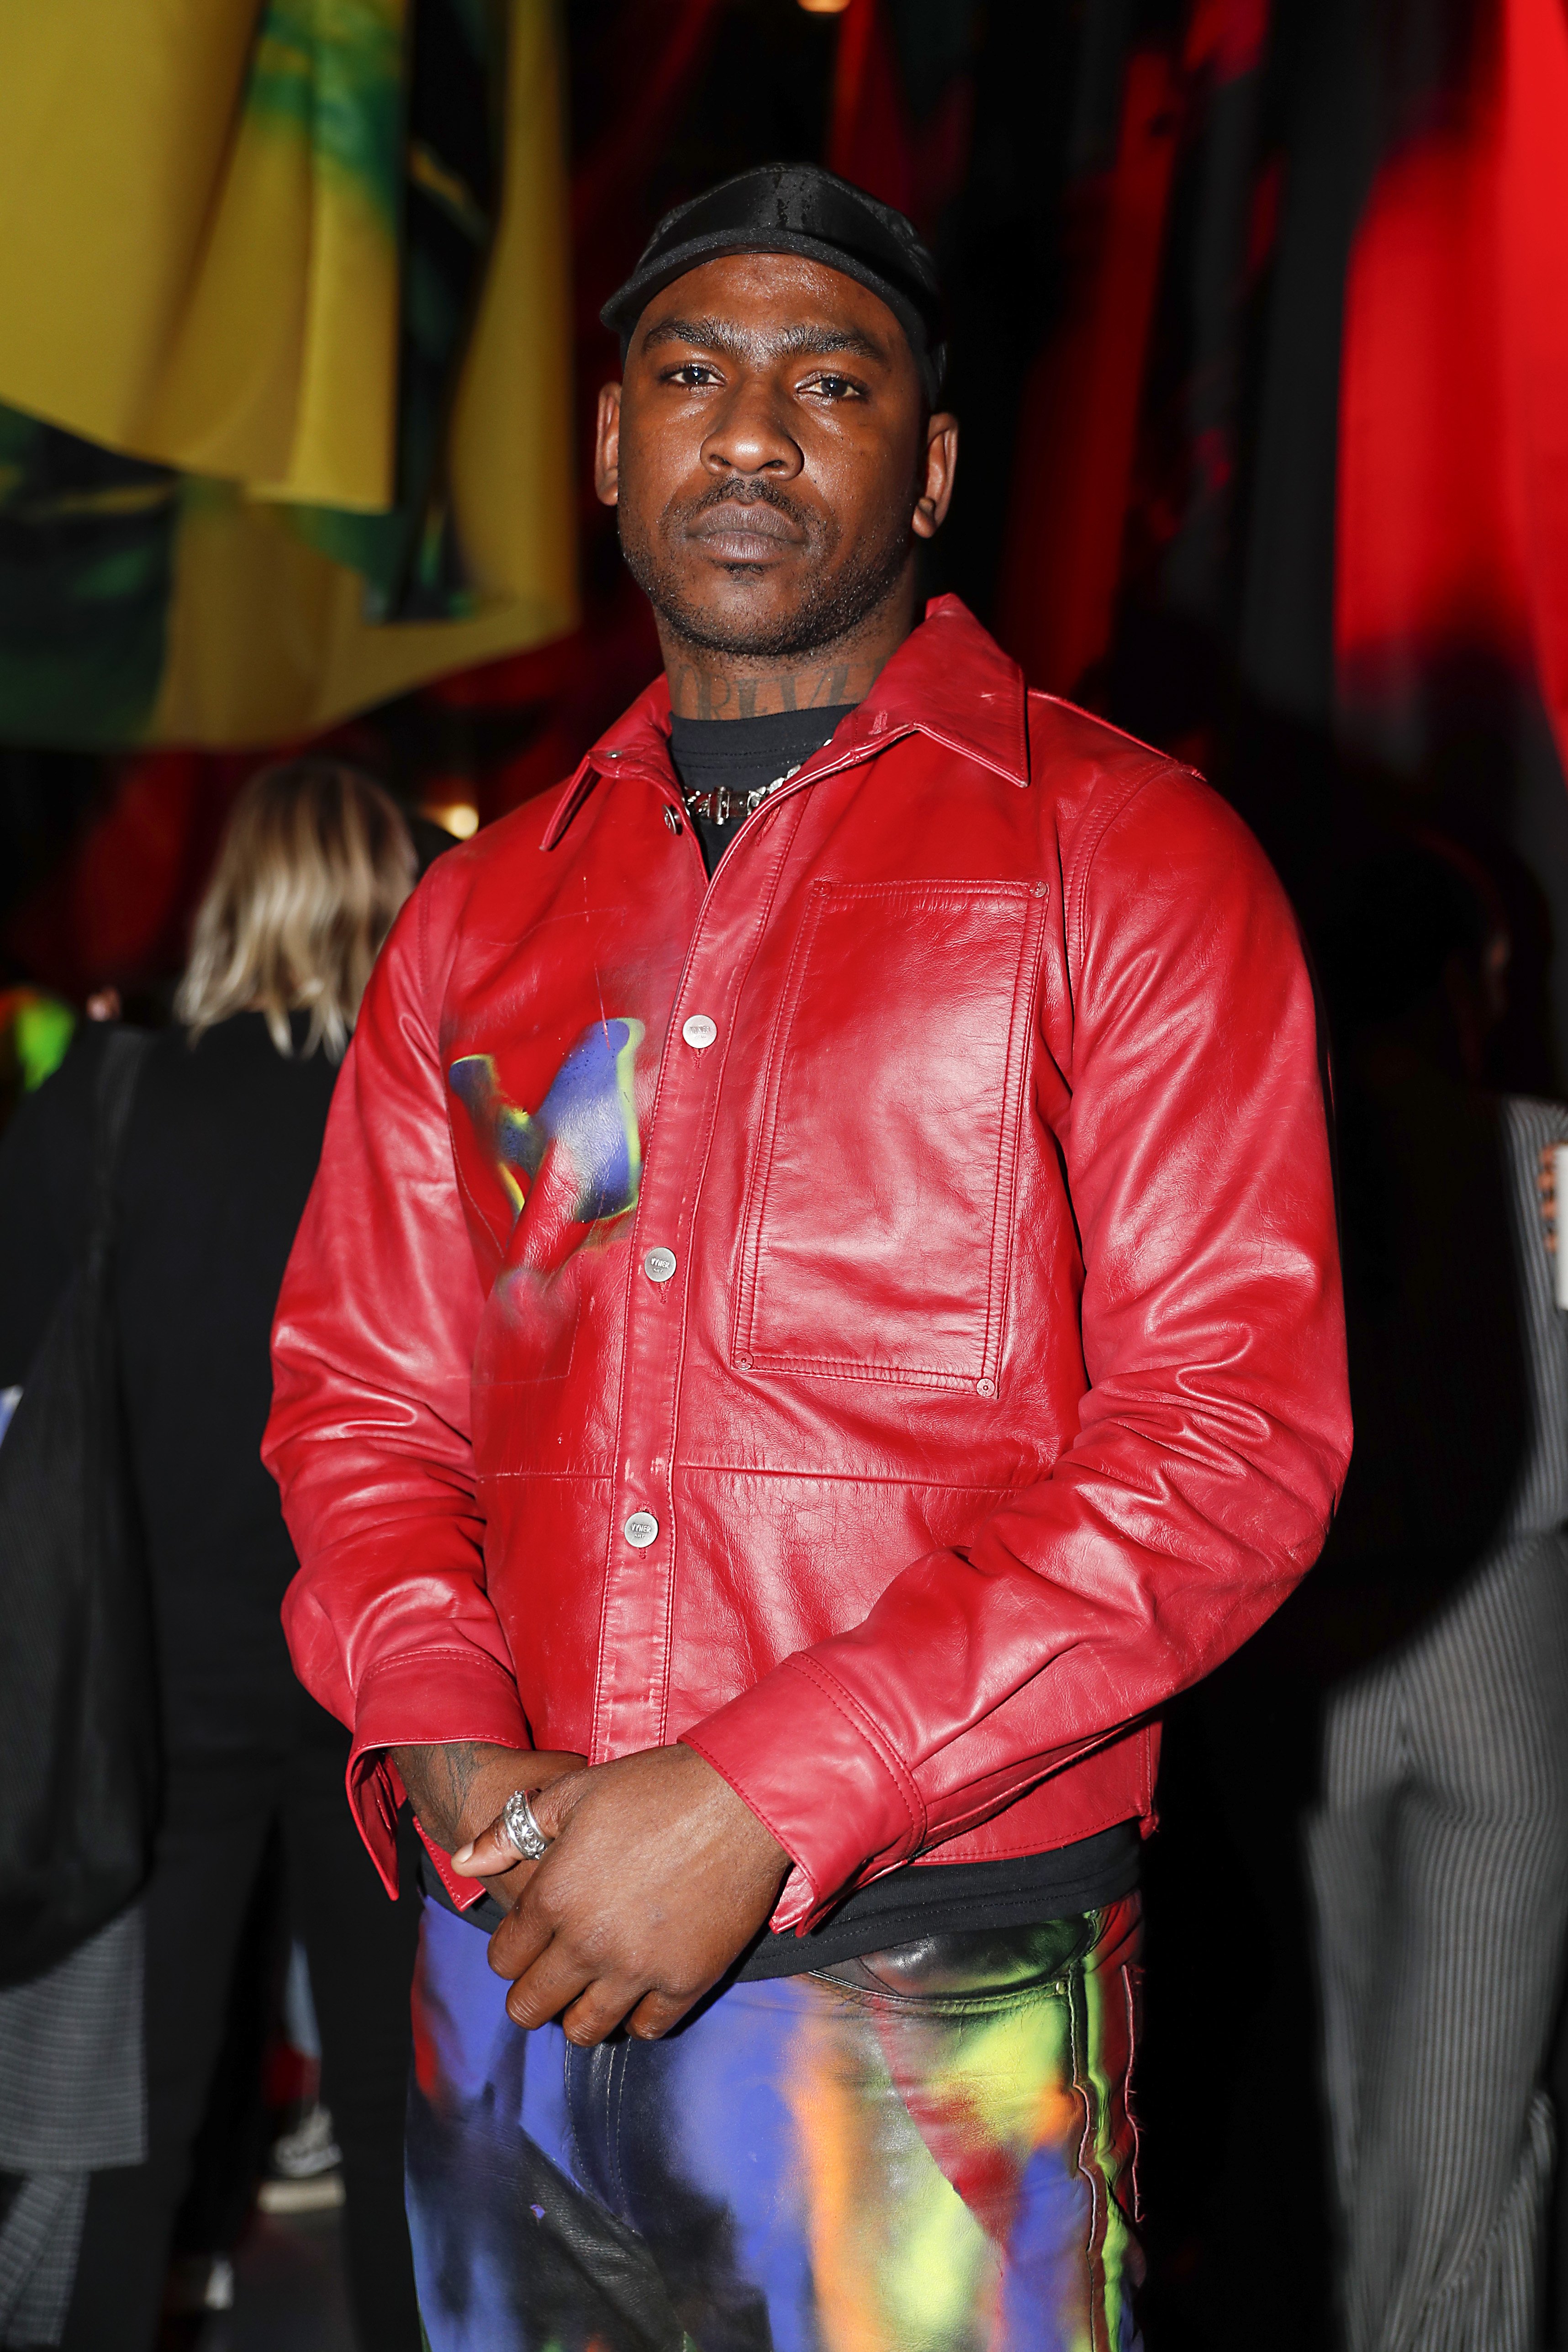  Skepta at the launch of 'Silent Madness' by Fashion Designer Mowalola on December 05, 2019, in London, England. | Source: Getty Images.